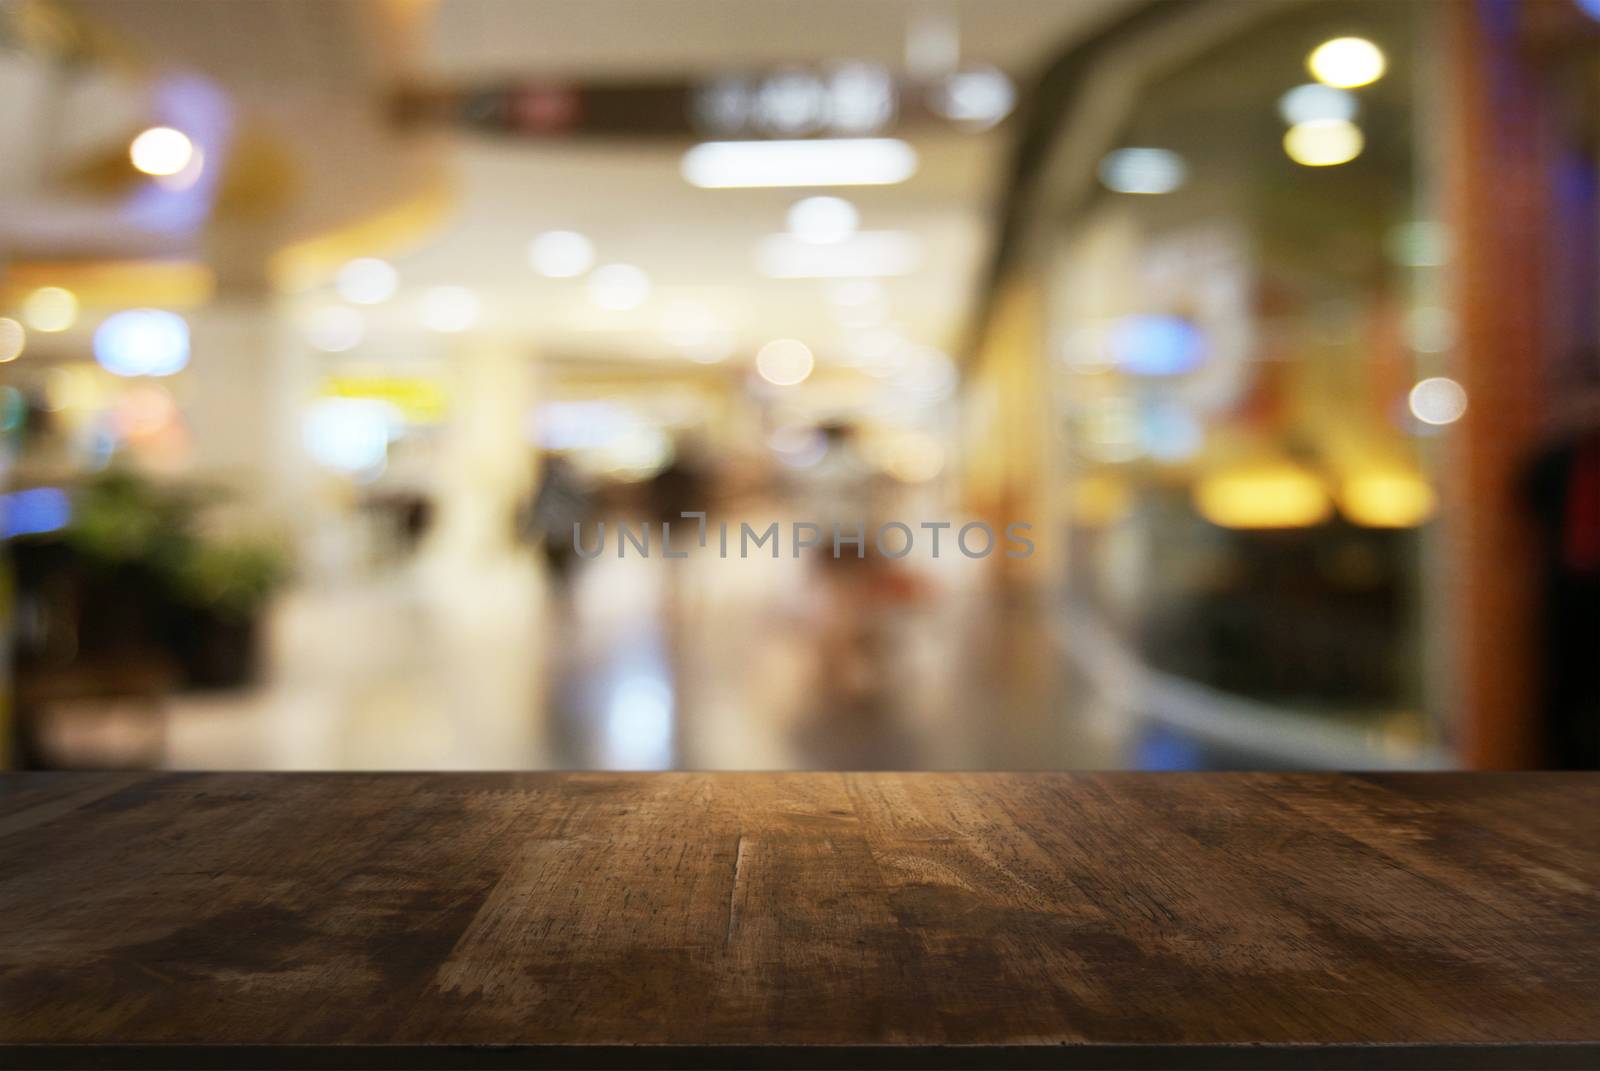 Empty wooden table in front of abstract blurred background of coffee shop . can be used for display Mock up  of product.